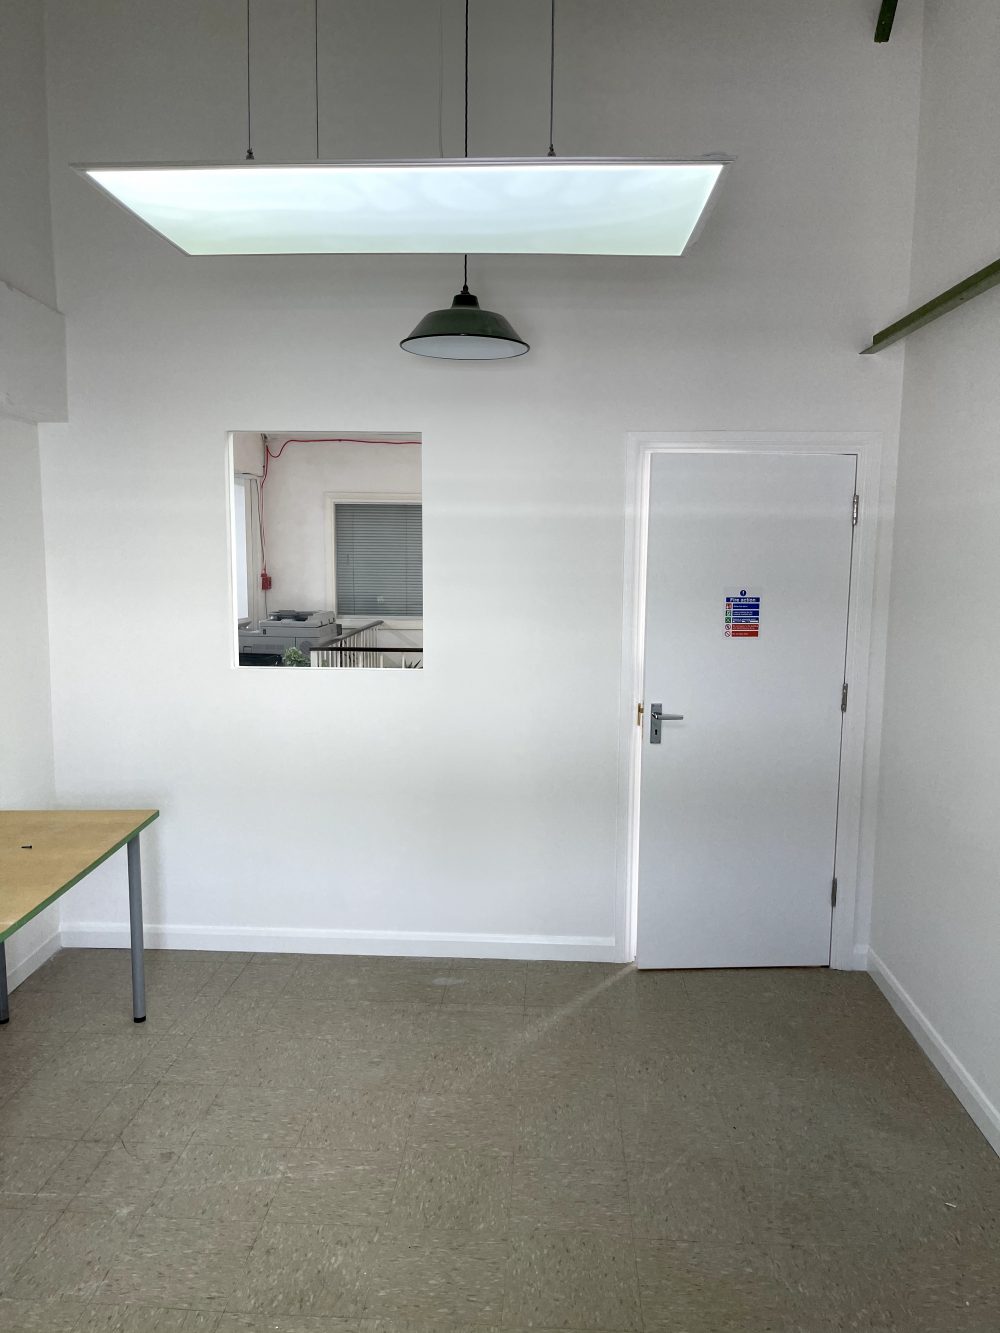 Studio Available to rent in N16 Green Lane Pic2